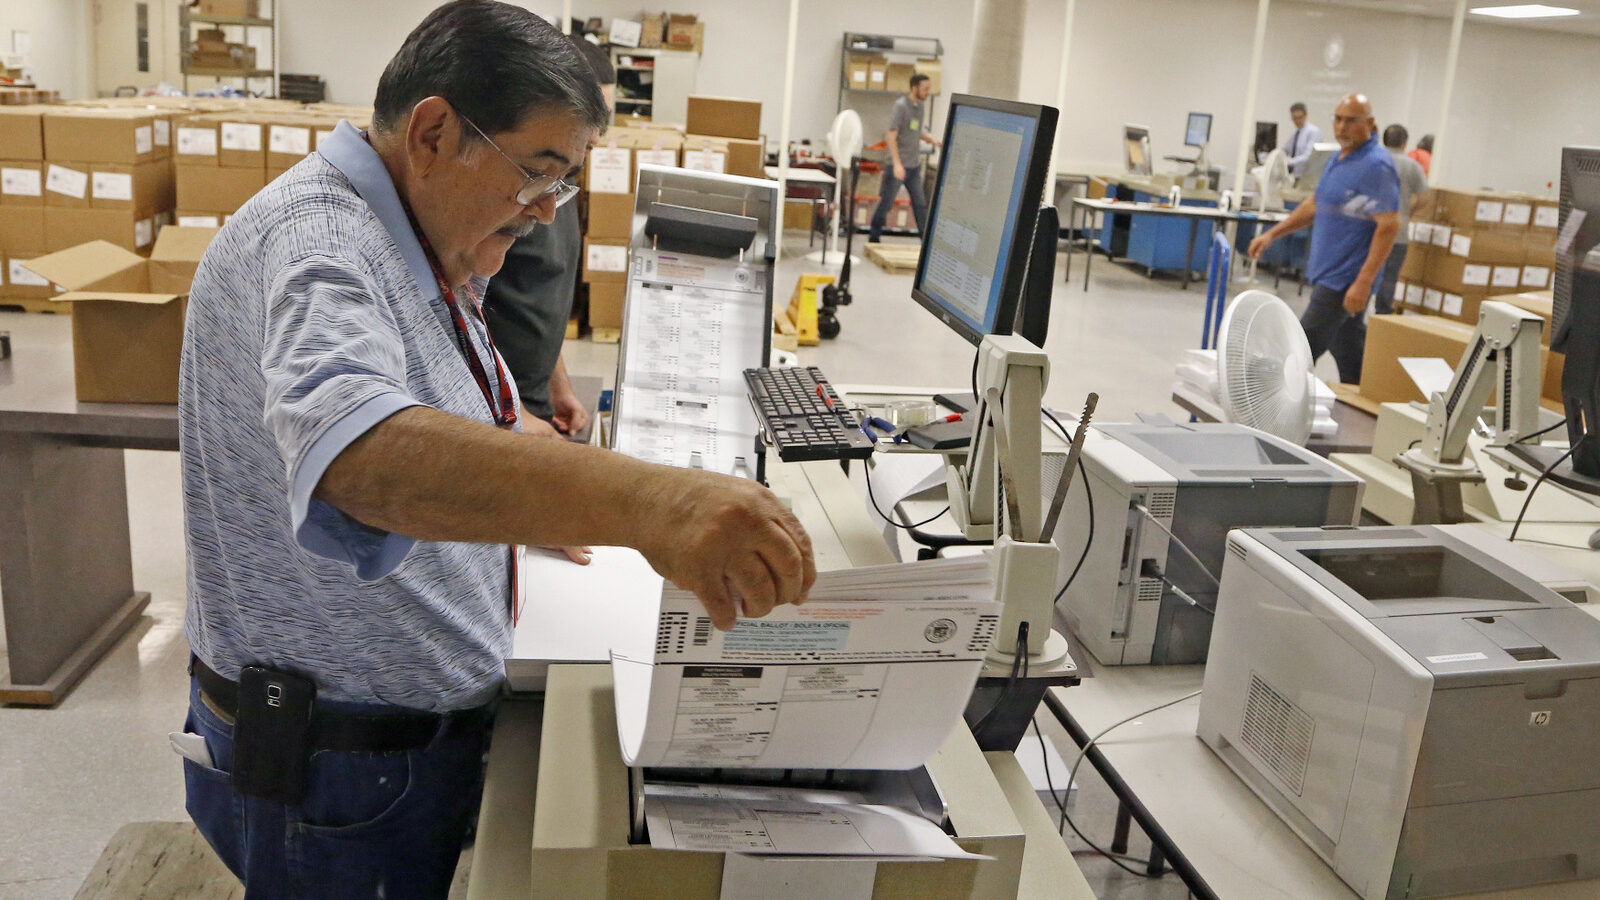 An Arizona elections official at the Maricopa inserts ballots into a machine to recount the votes in the 5th Congressional District race Tuesday, Sept. 13, 2016, in Phoenix. (AP Photo/Ross D. Franklin)